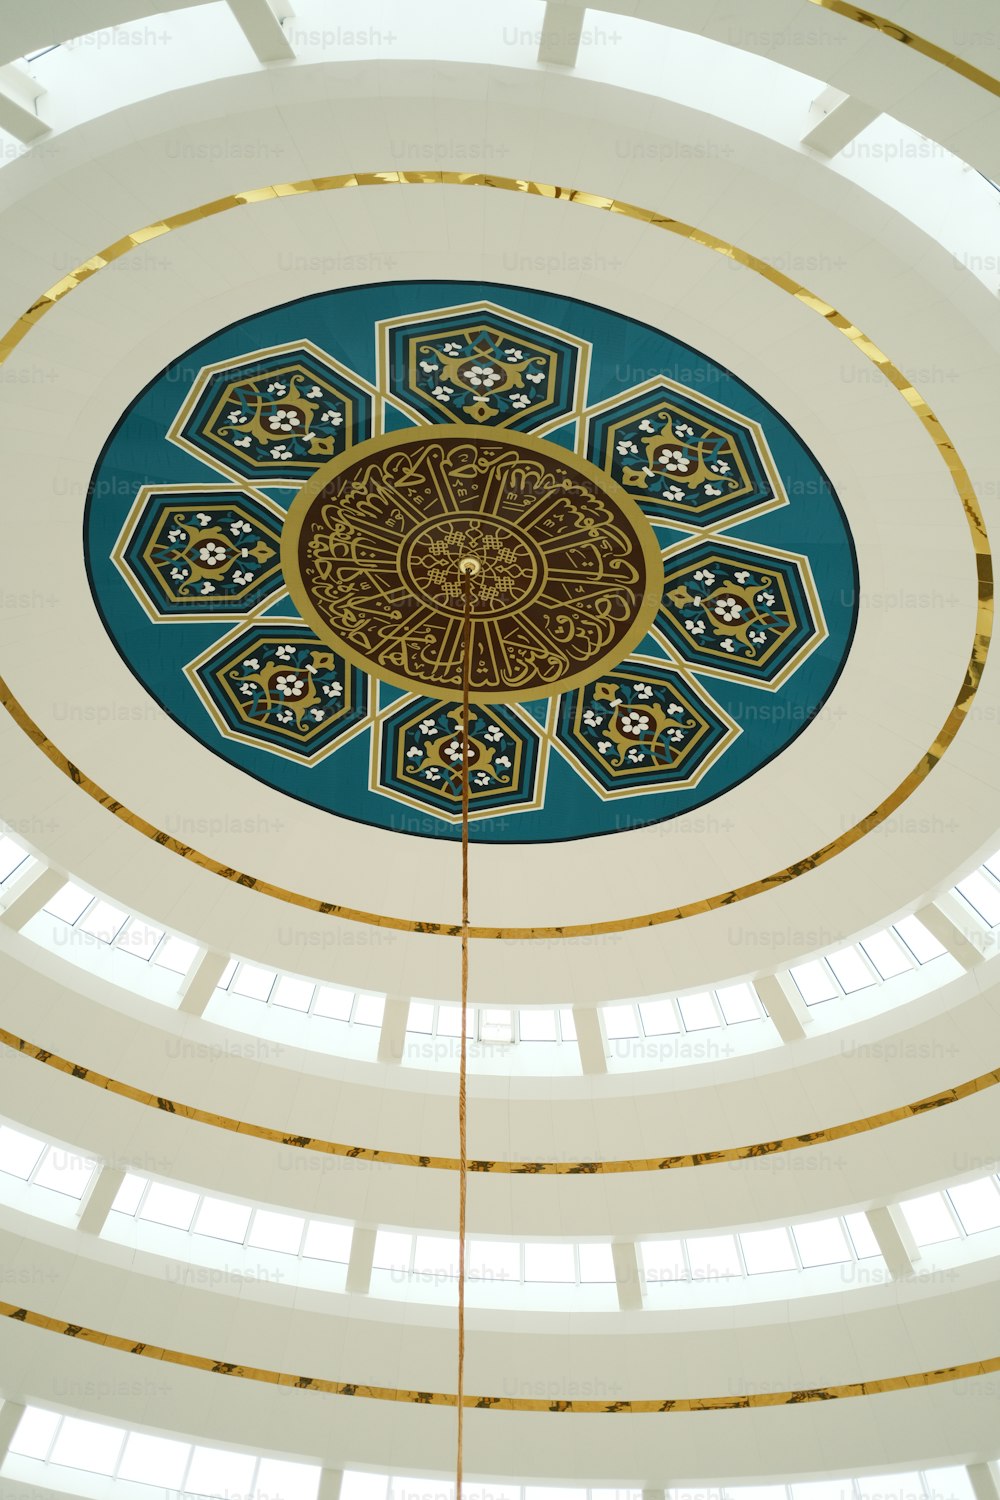 the ceiling of a large building with a clock on it